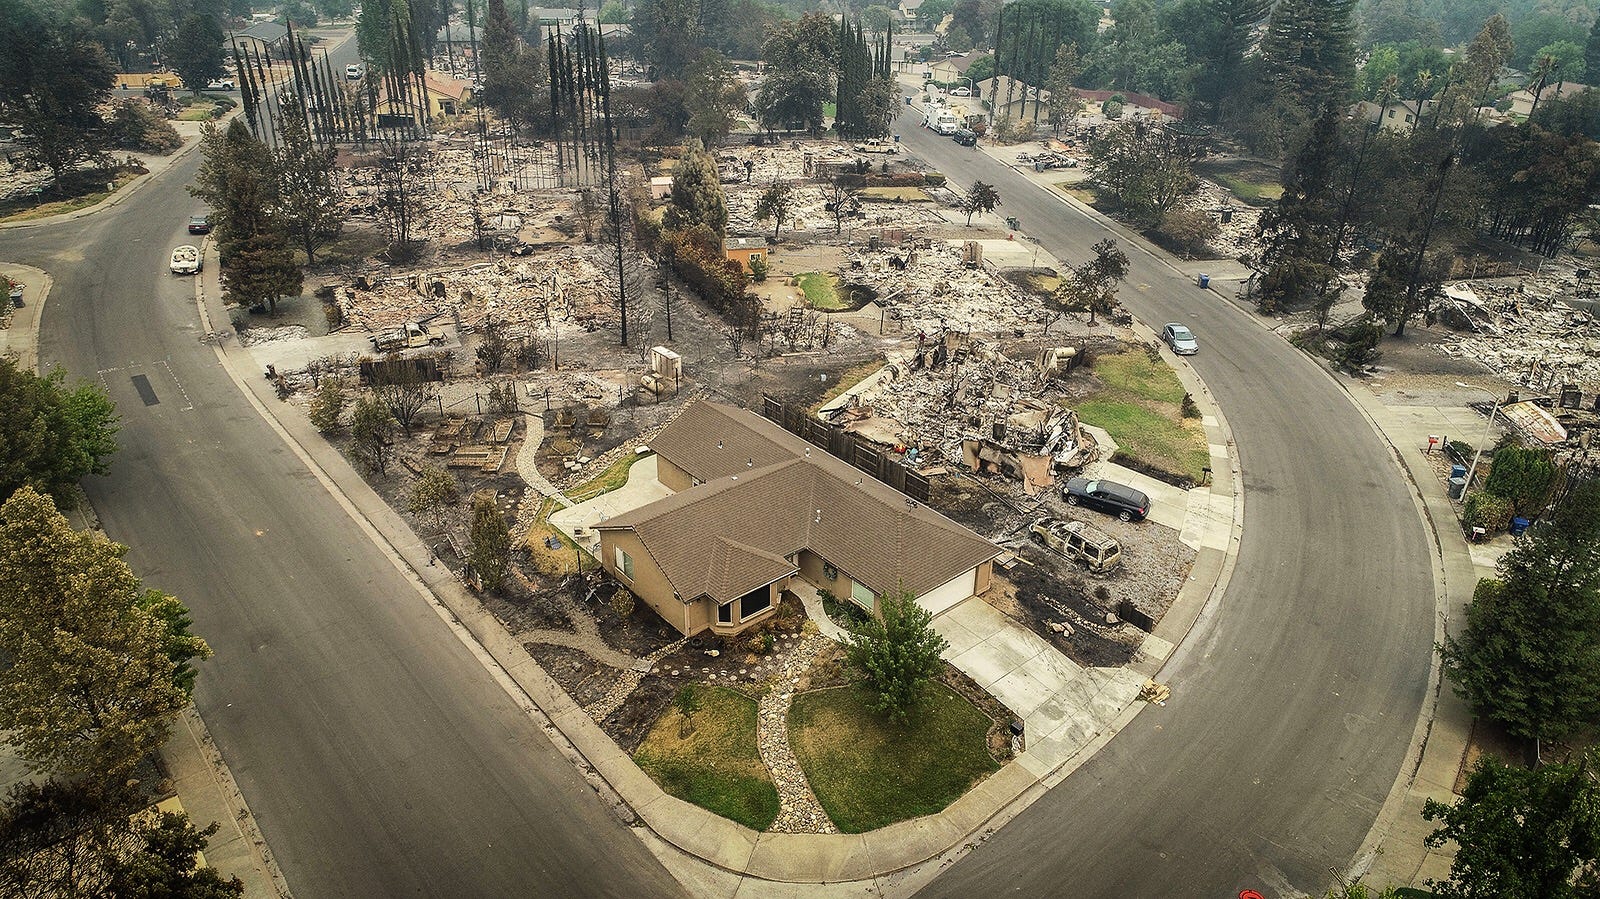 An aerial view of the homes of Harlan Drive and Bedrock Lane in the Lake Redding Estates neighborhood on July 31, 2018 shows the devastation caused by the Carr Fire which roared through the area late last week. The area remains closed to residents as